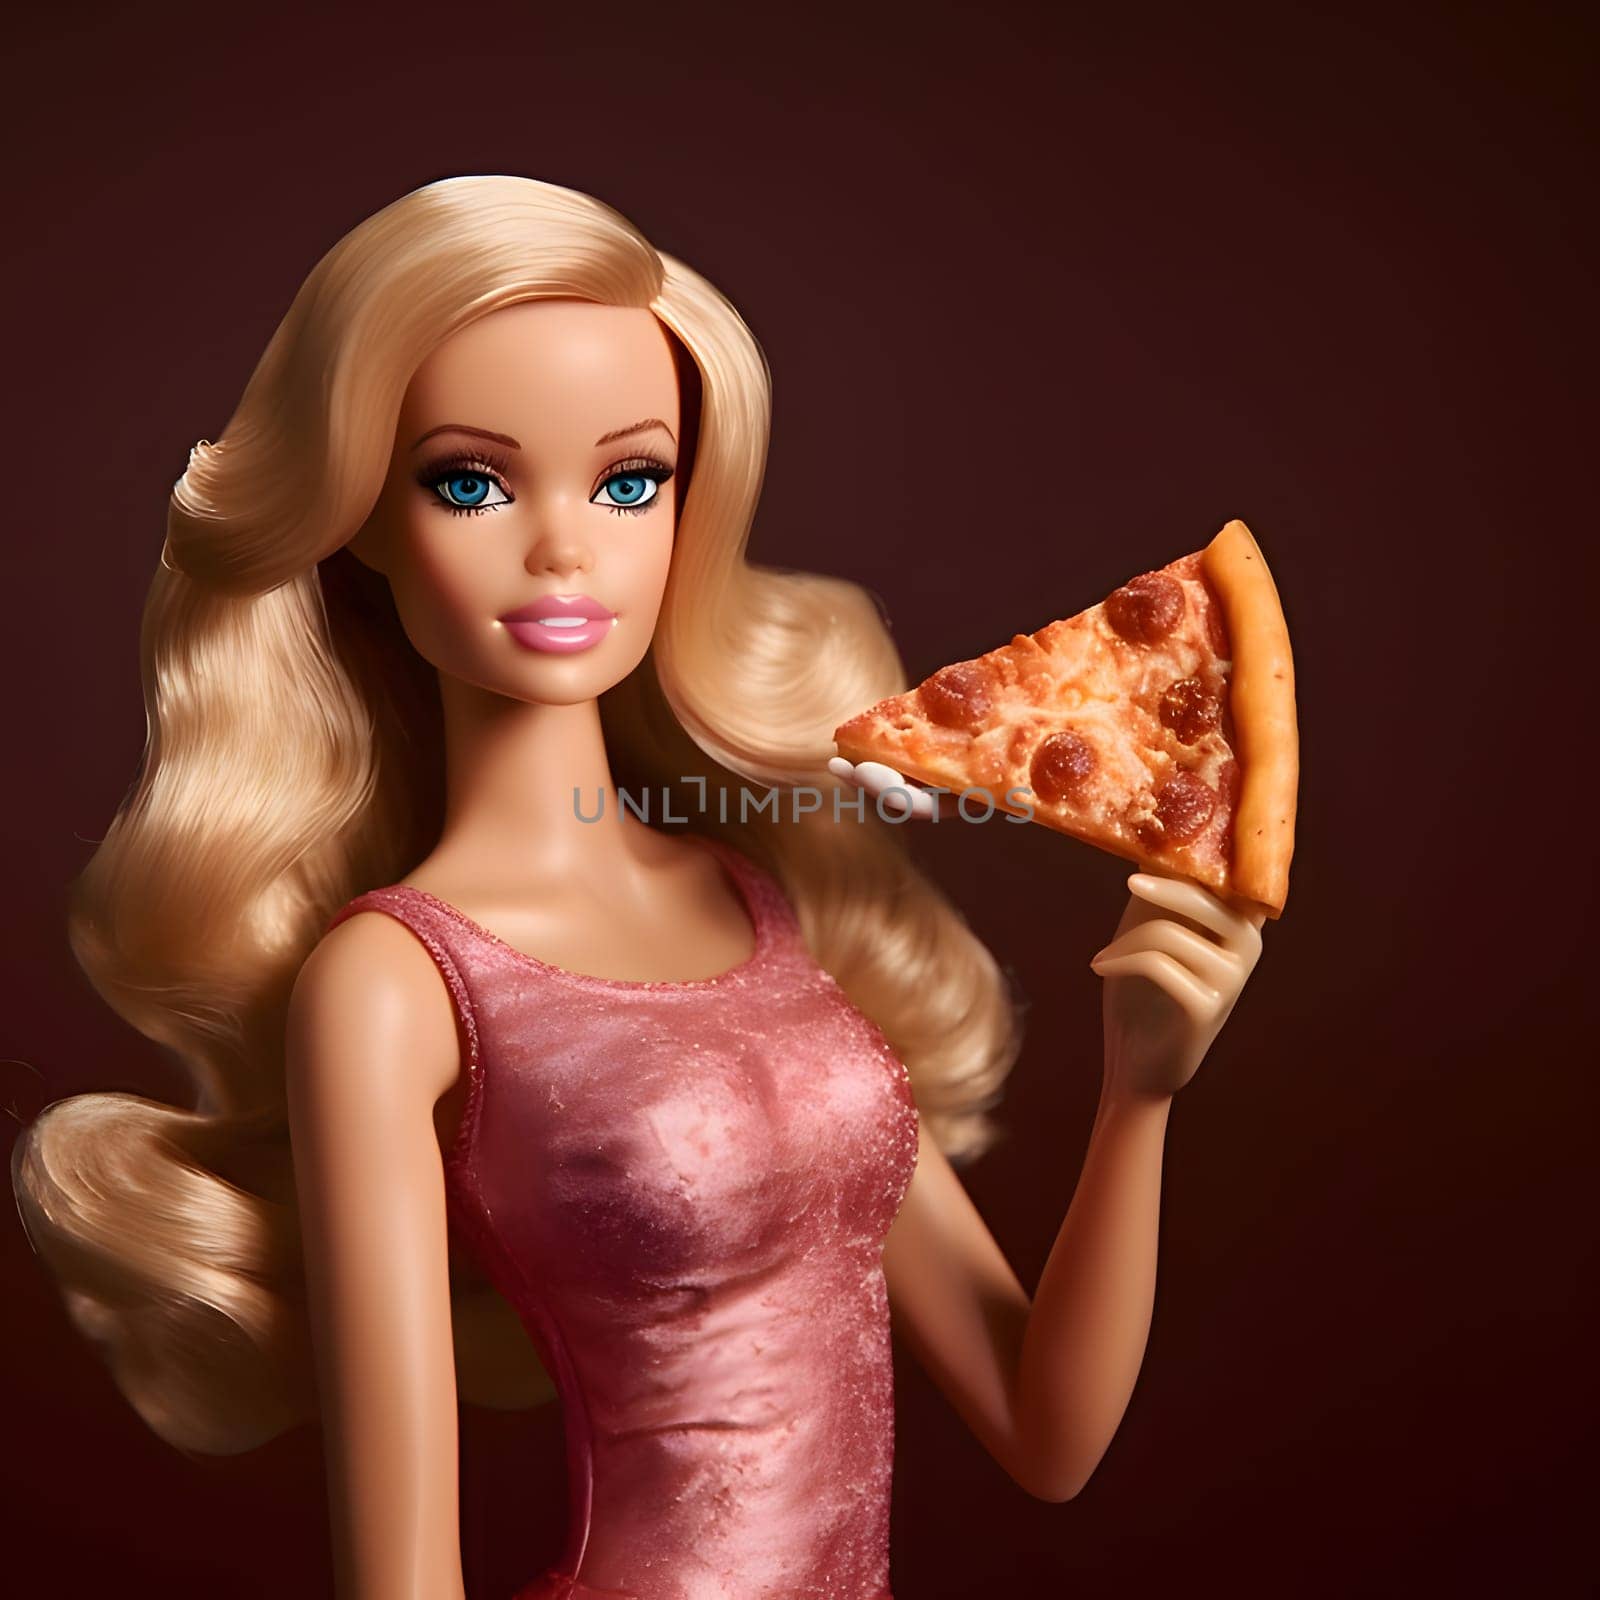 Young with long brown hair Barbie with slice of pizza in her hand, dark background. by ThemesS